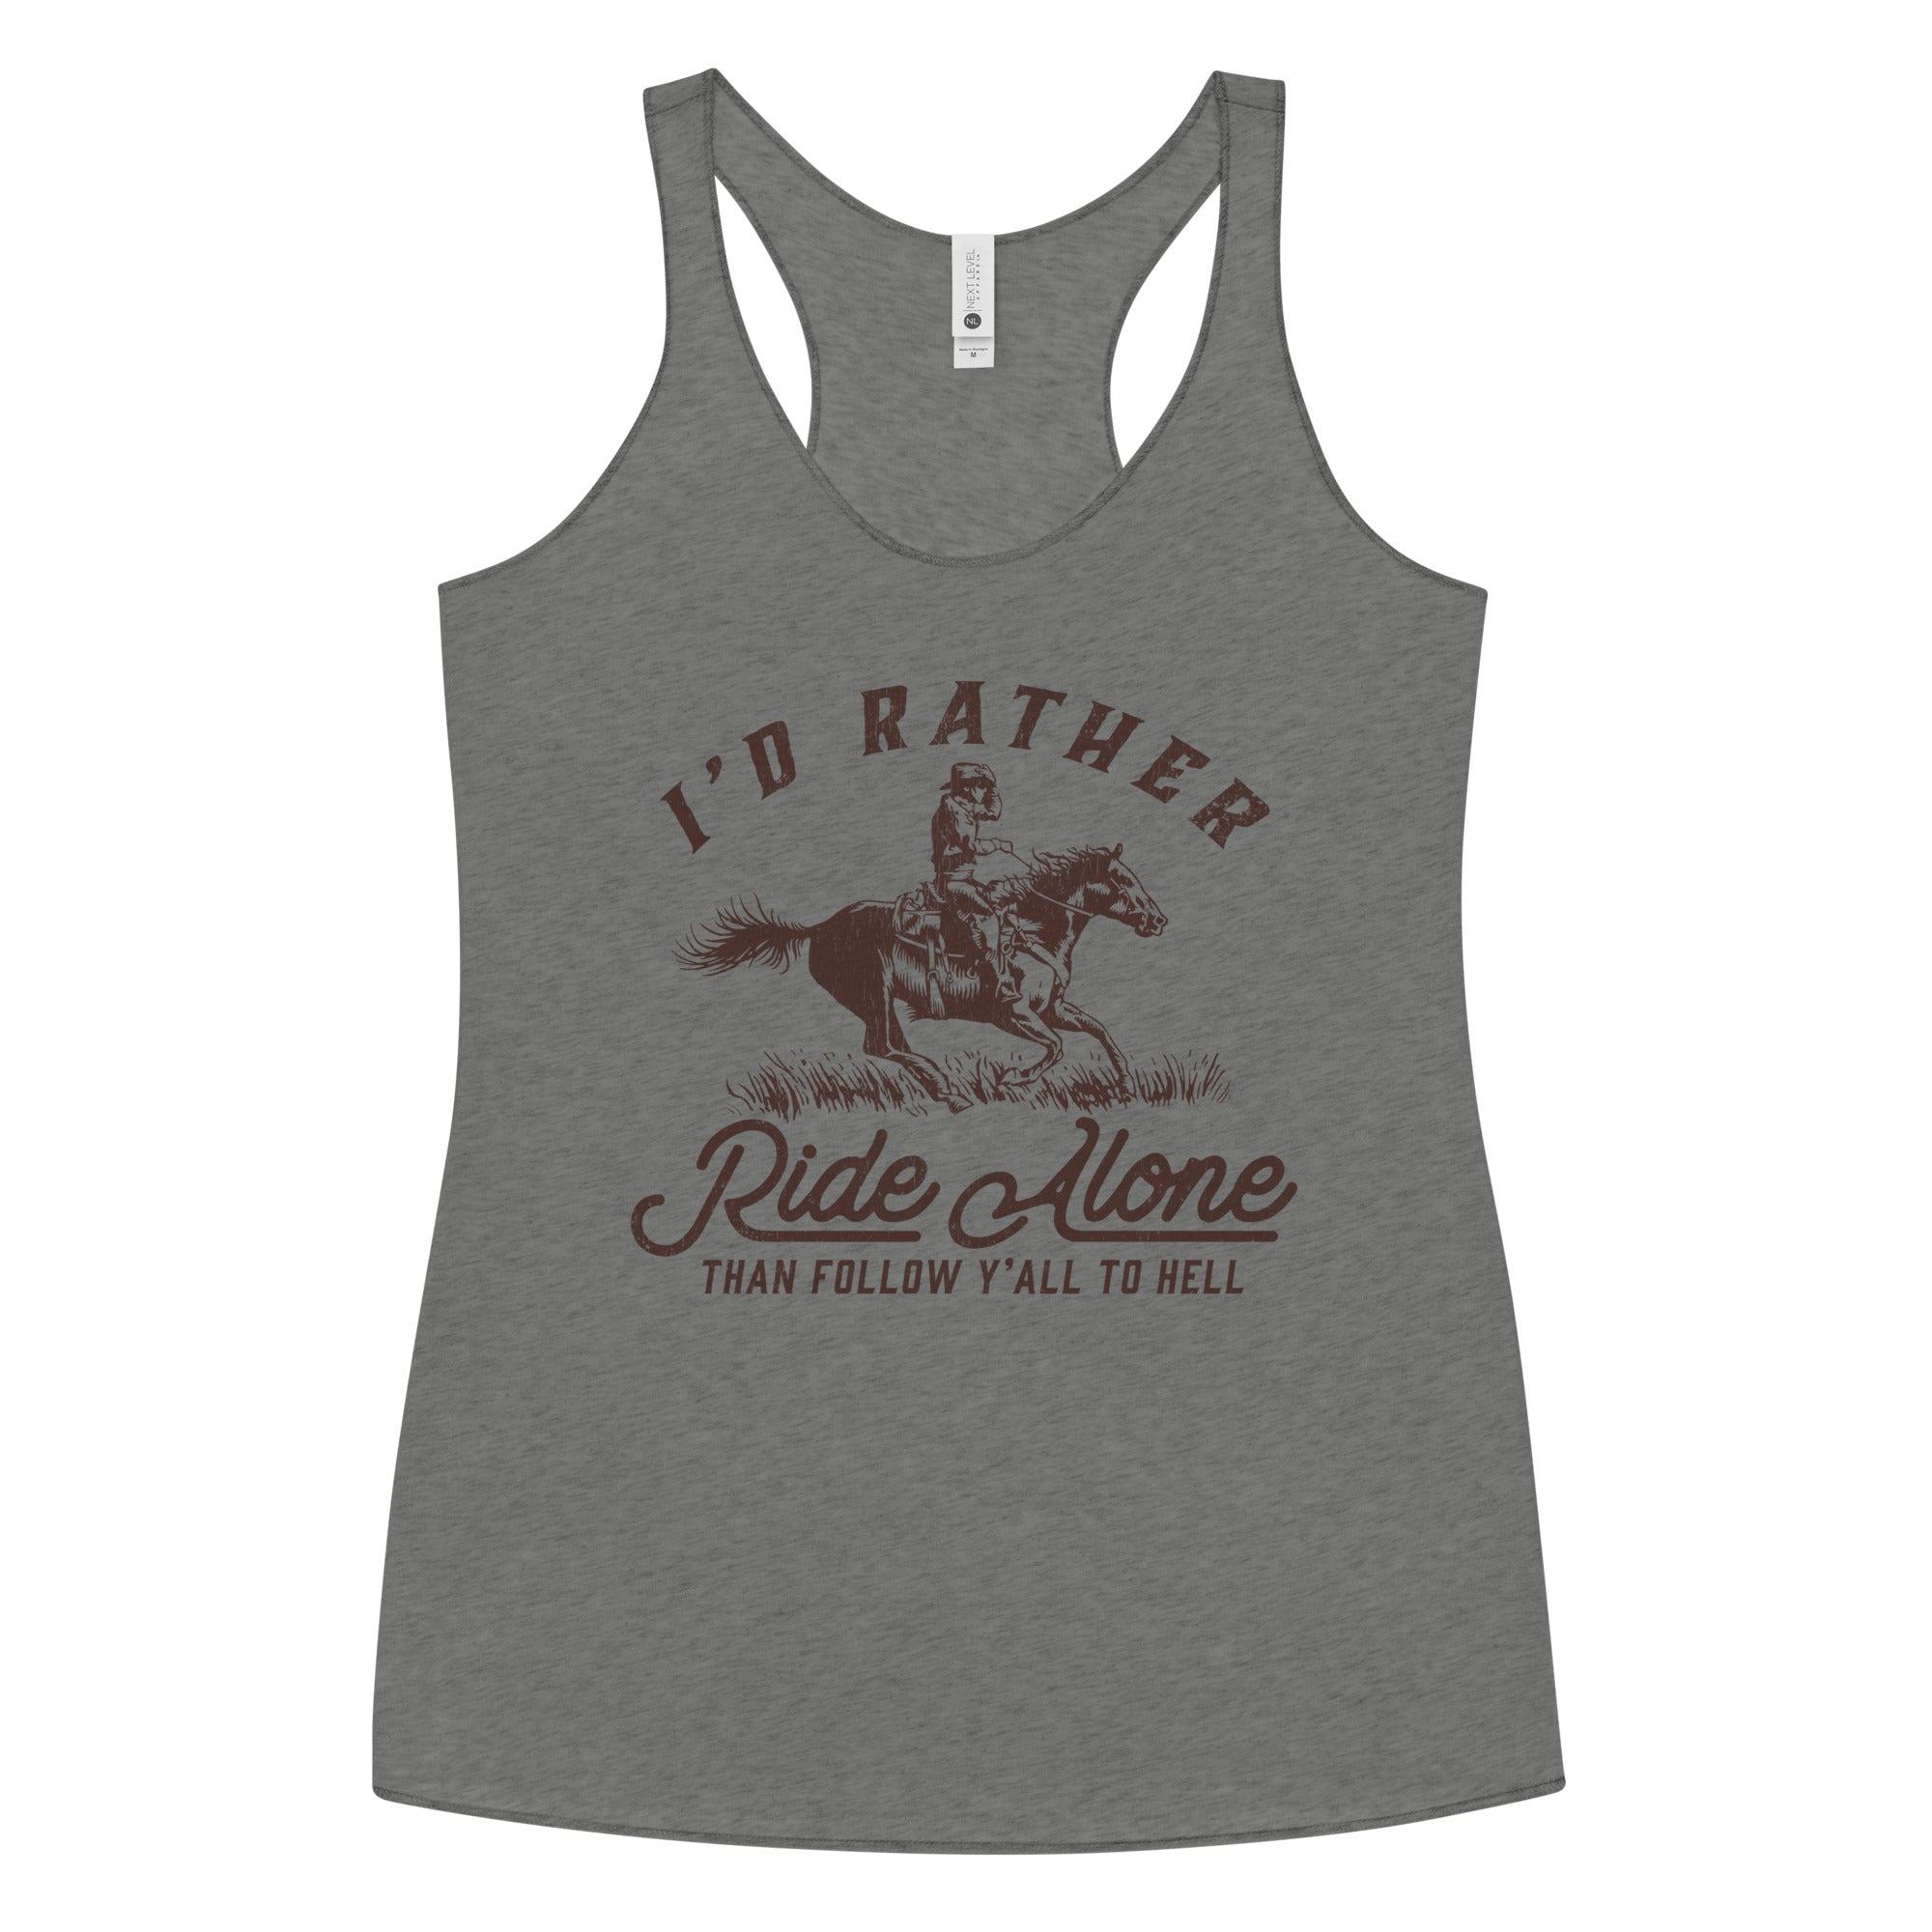 I'd Rather Ride Alone Than Follow Y-All to Hell Women's Racerback Tank